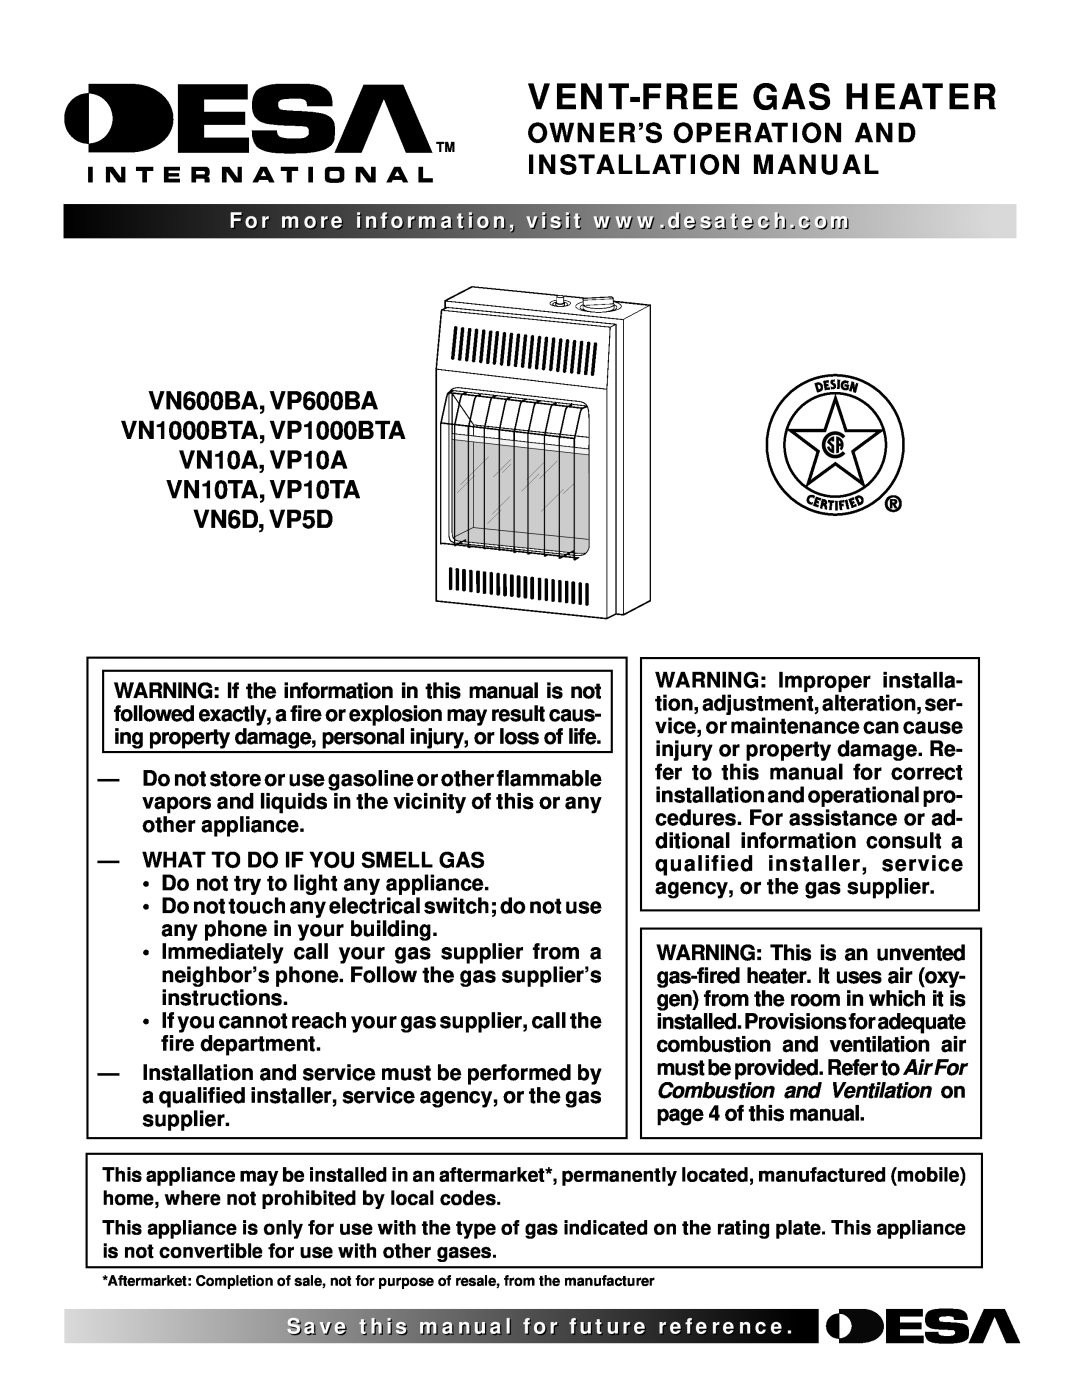 Desa VN10A installation manual What To Do If You Smell Gas, Do not try to light any appliance, Vent-Freegas Heater 